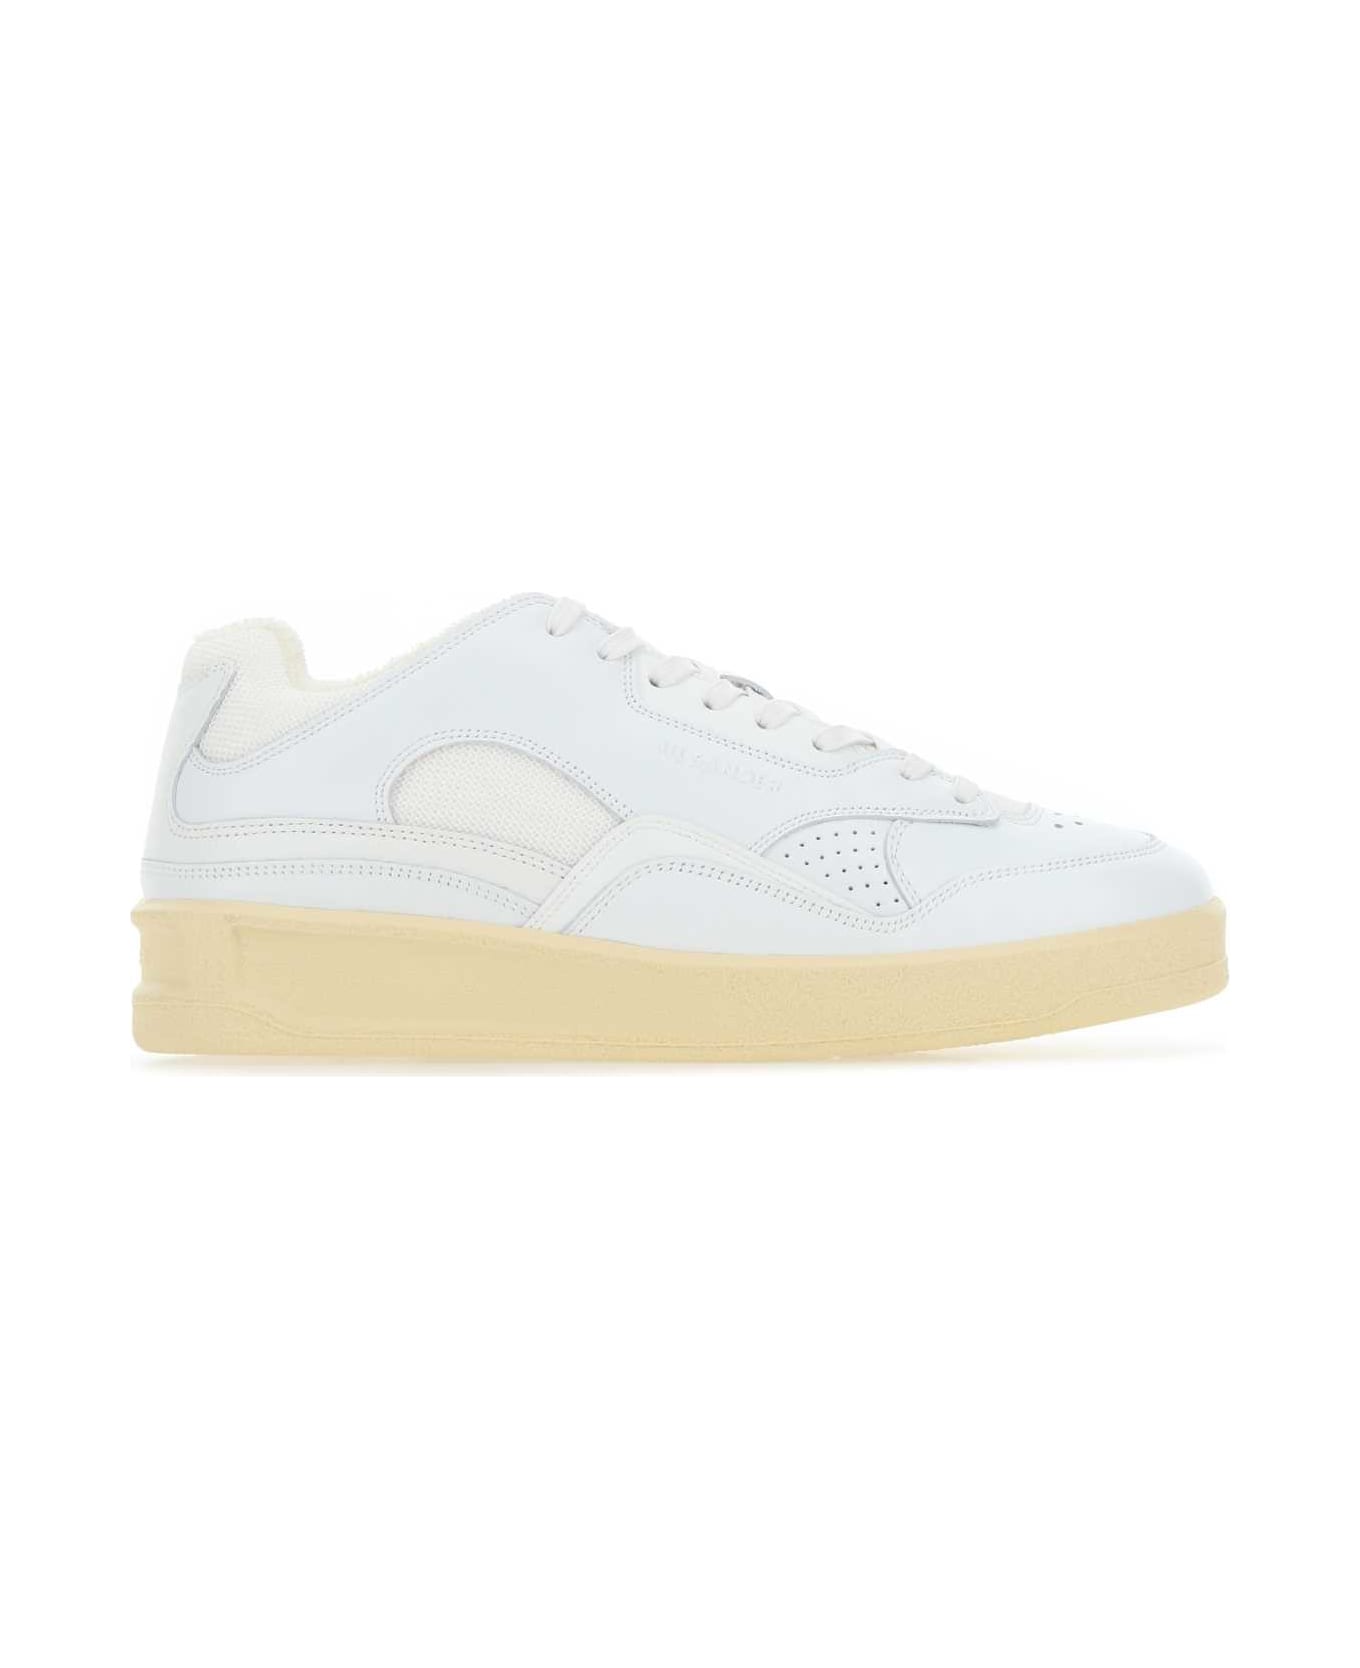 Jil Sander White Leather And Fabric Basket Sneakers - 100